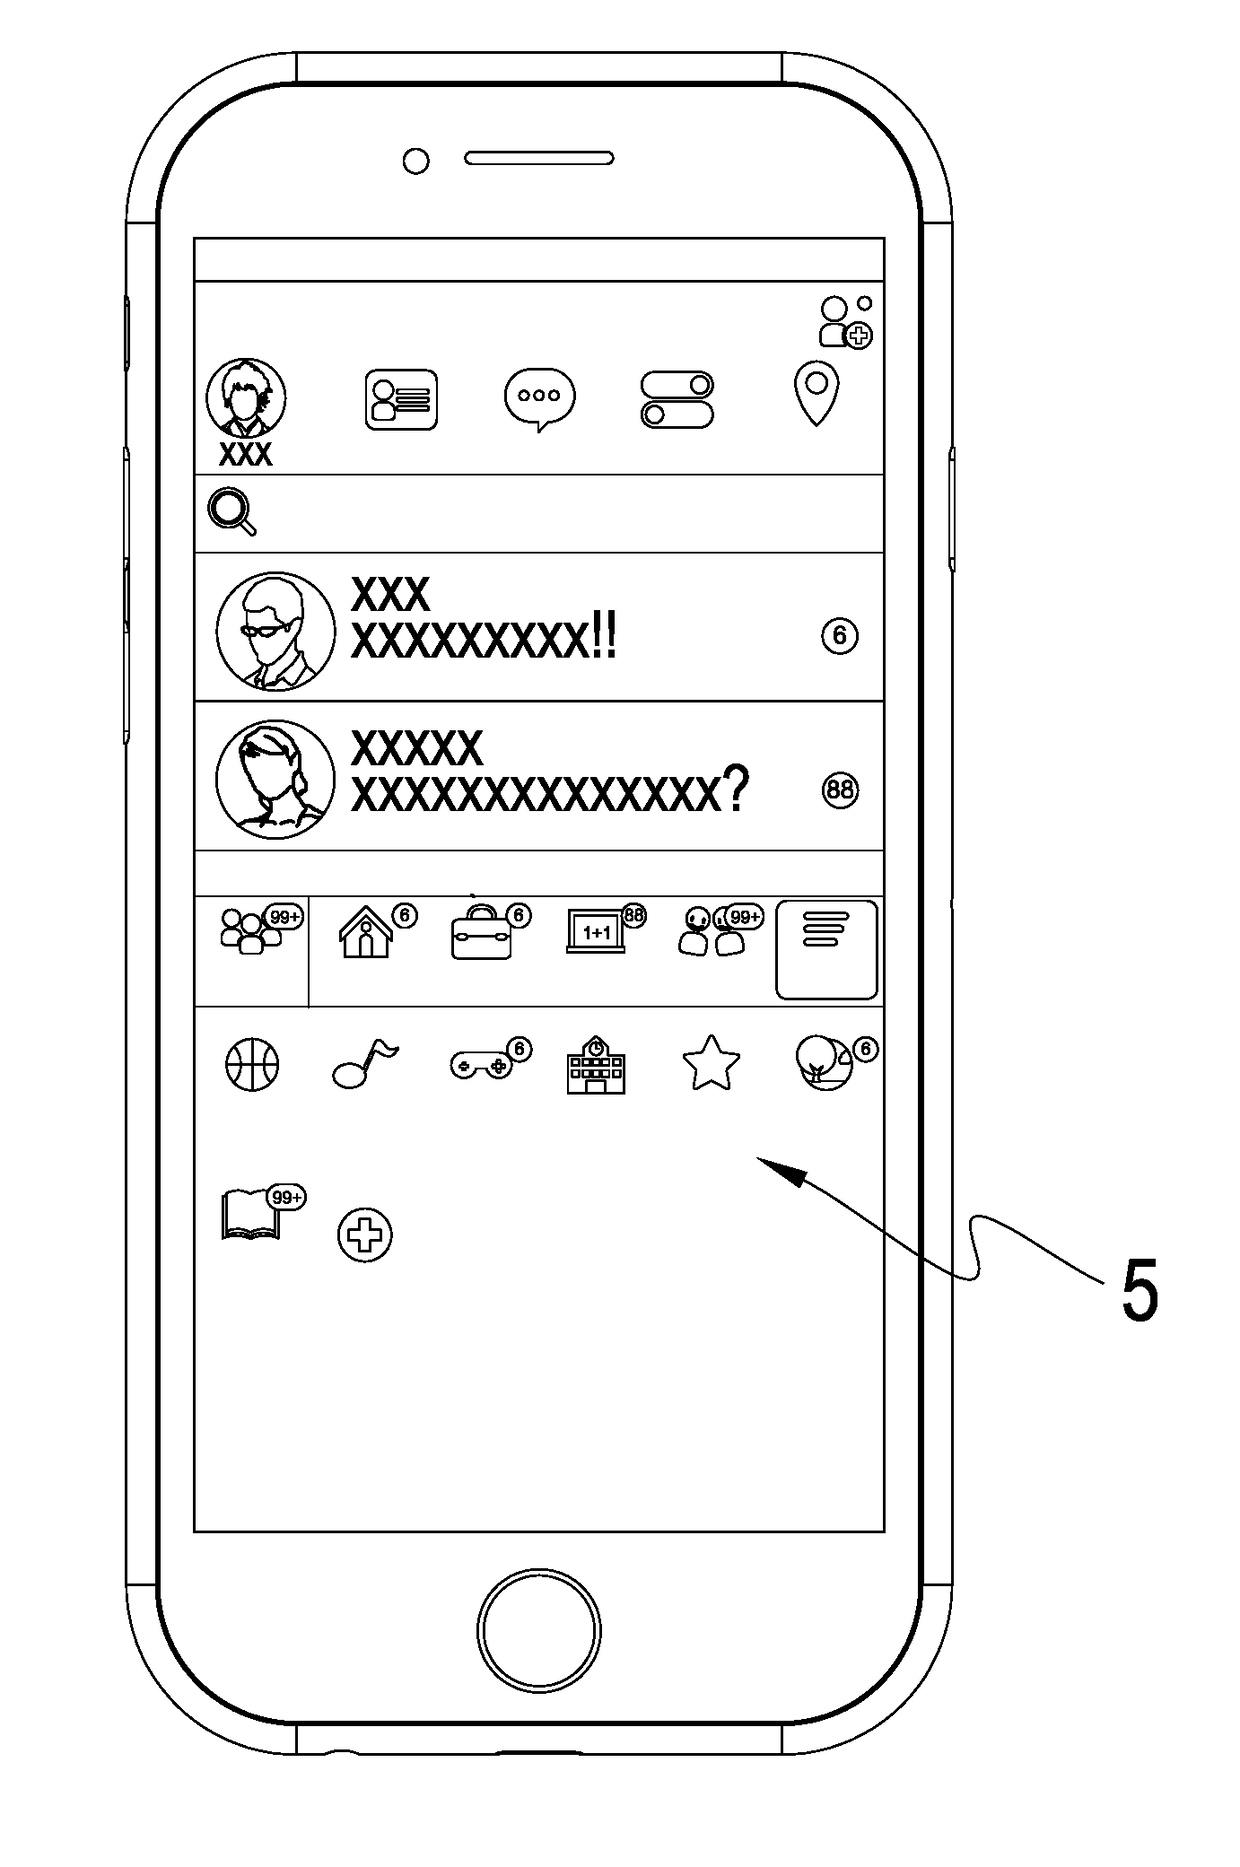 Messaging system with configurable identification